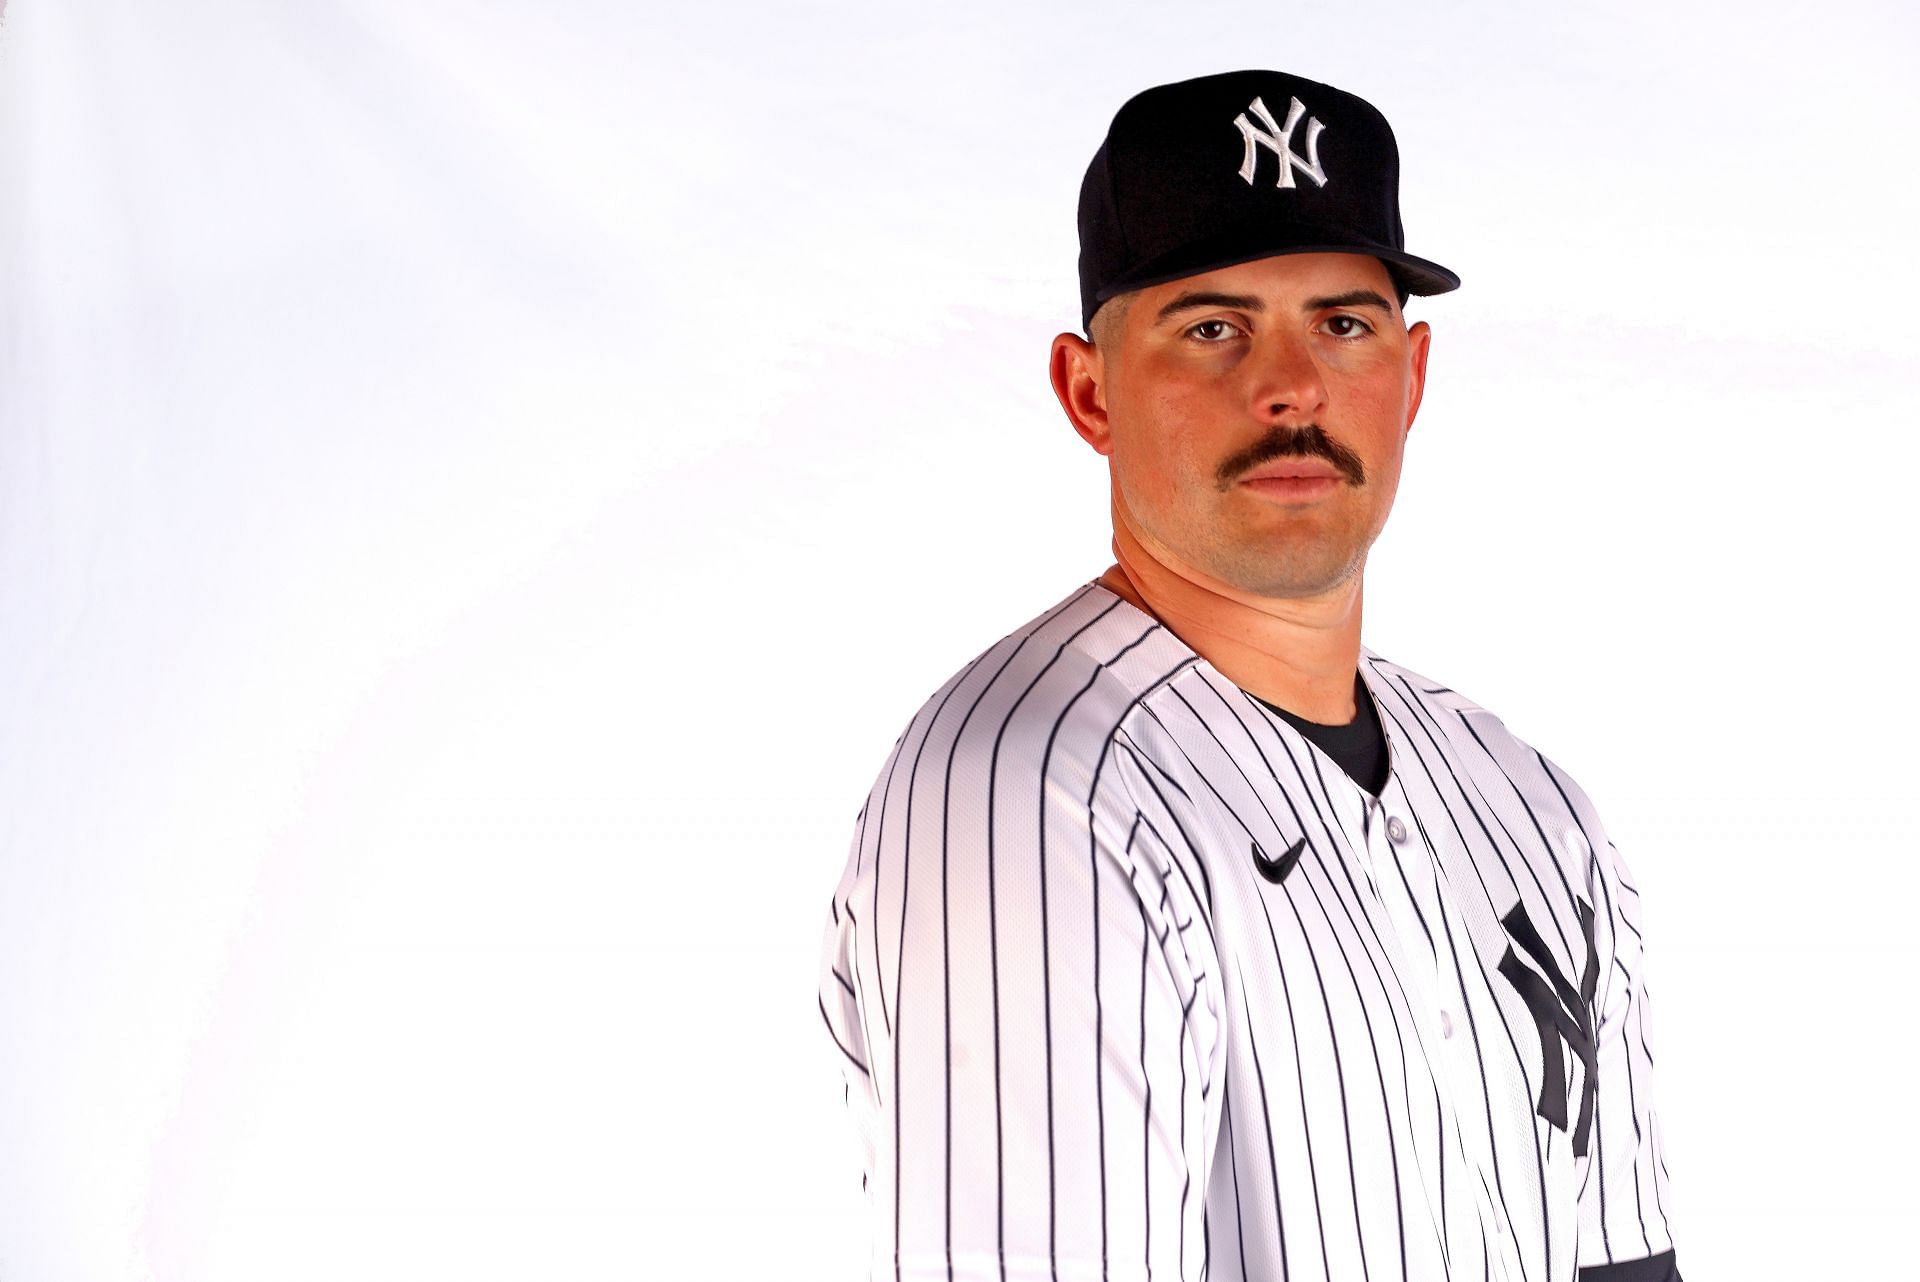 Carlos Rodon #55 of the New York Yankees poses for a portrait during media day